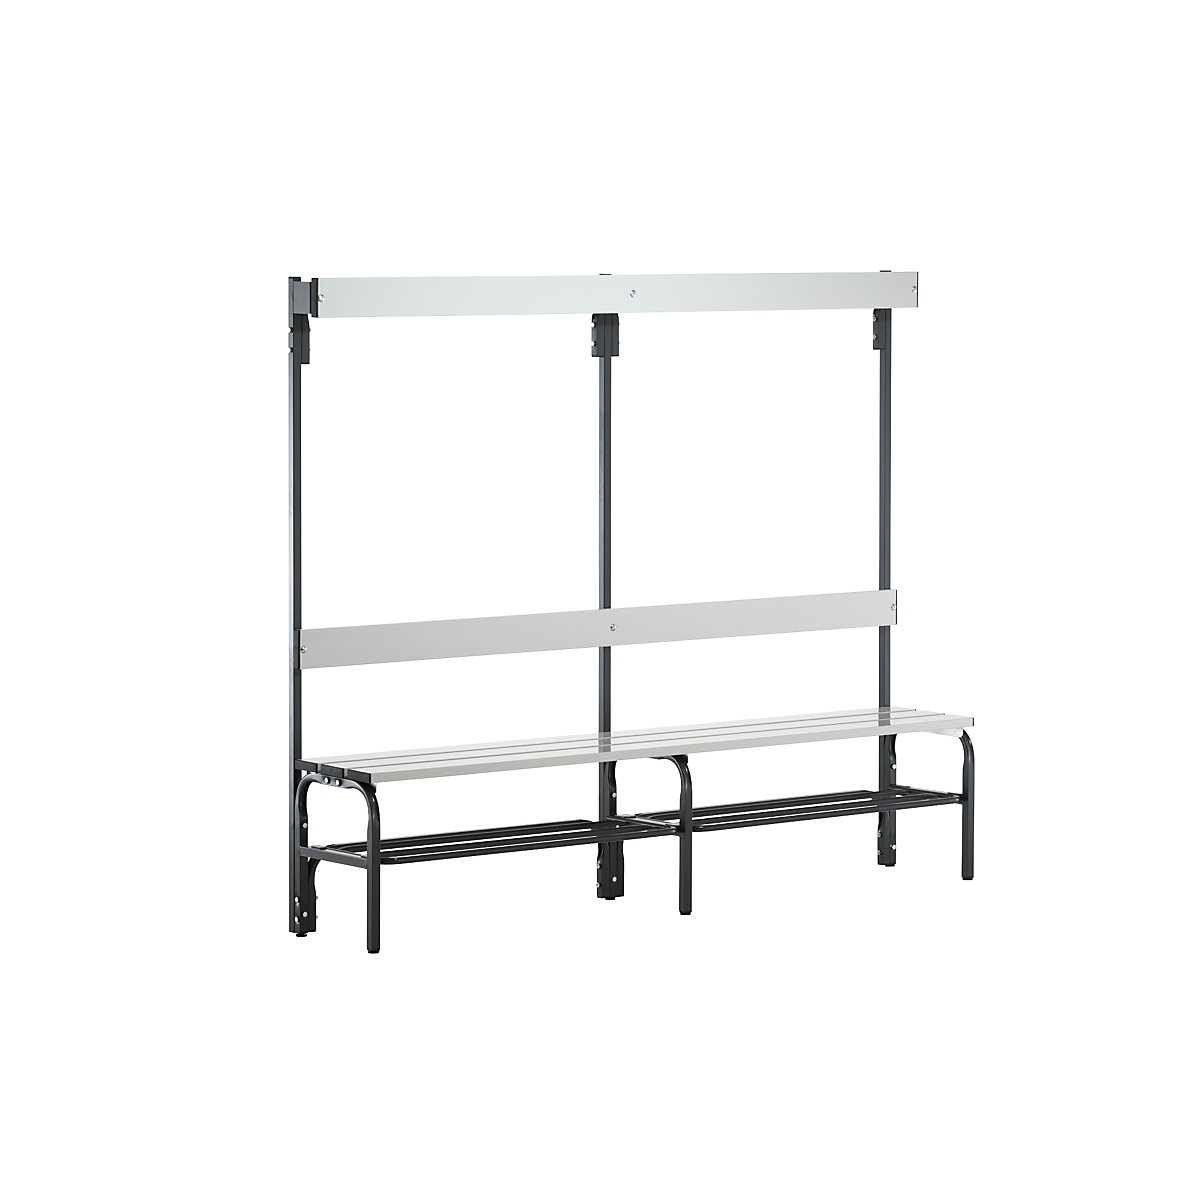 Sypro – Changing room bench made of stainless steel, HxD 1650 x 375 mm, length 1500 mm, 6 hooks, charcoal, shoe rack